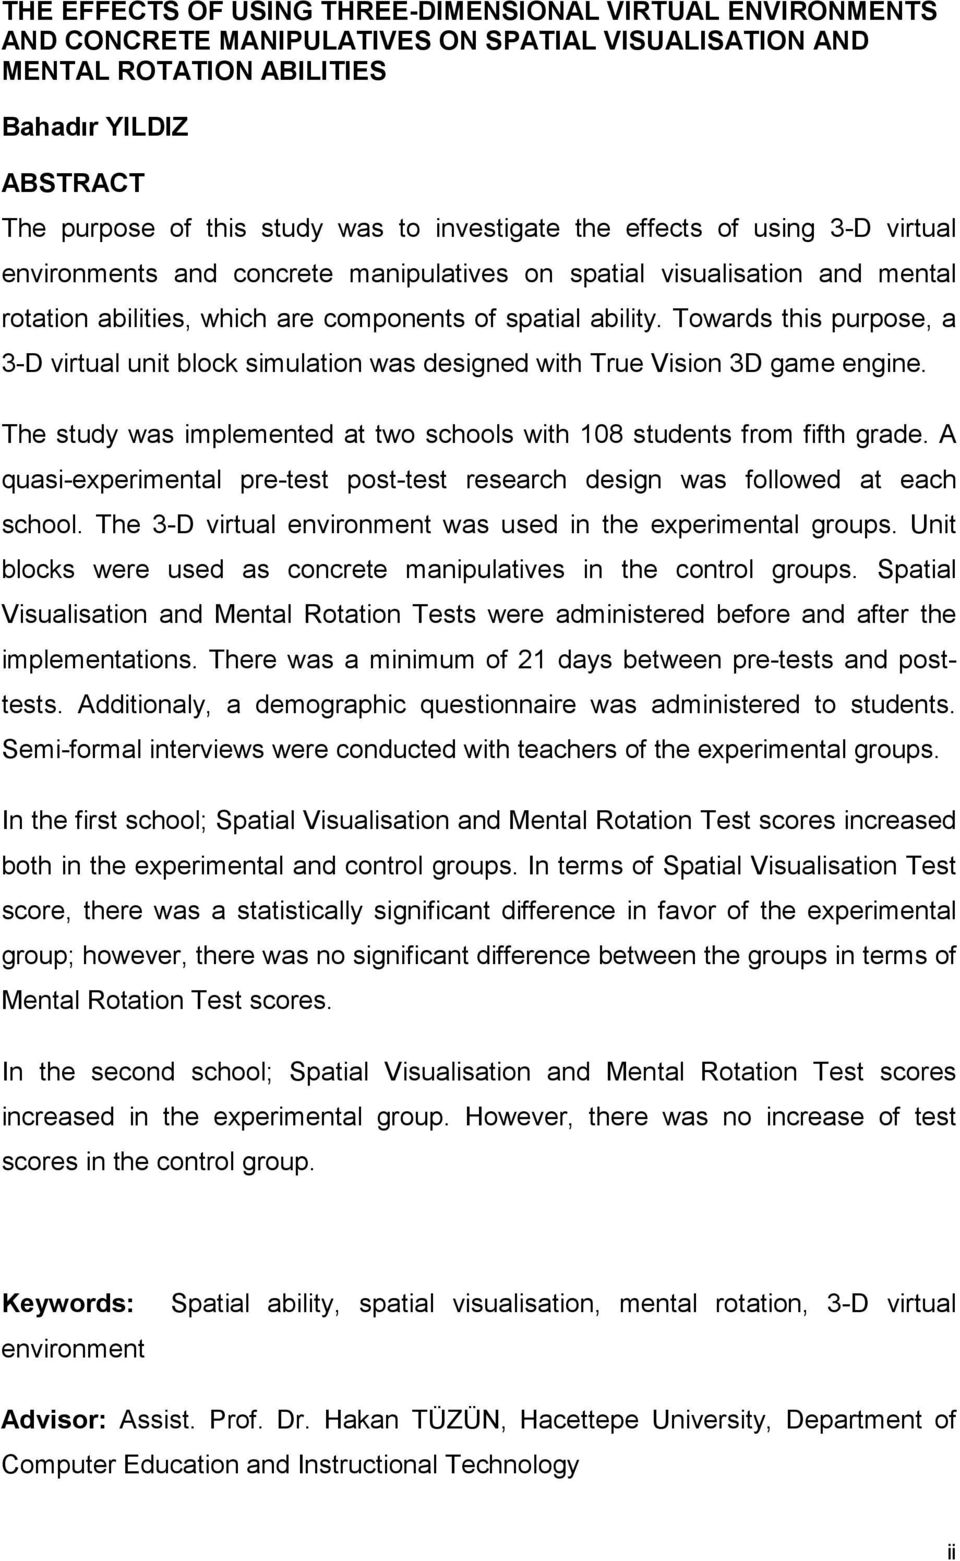 Towards this purpose, a 3-D virtual unit block simulation was designed with True Vision 3D game engine. The study was implemented at two schools with 108 students from fifth grade.